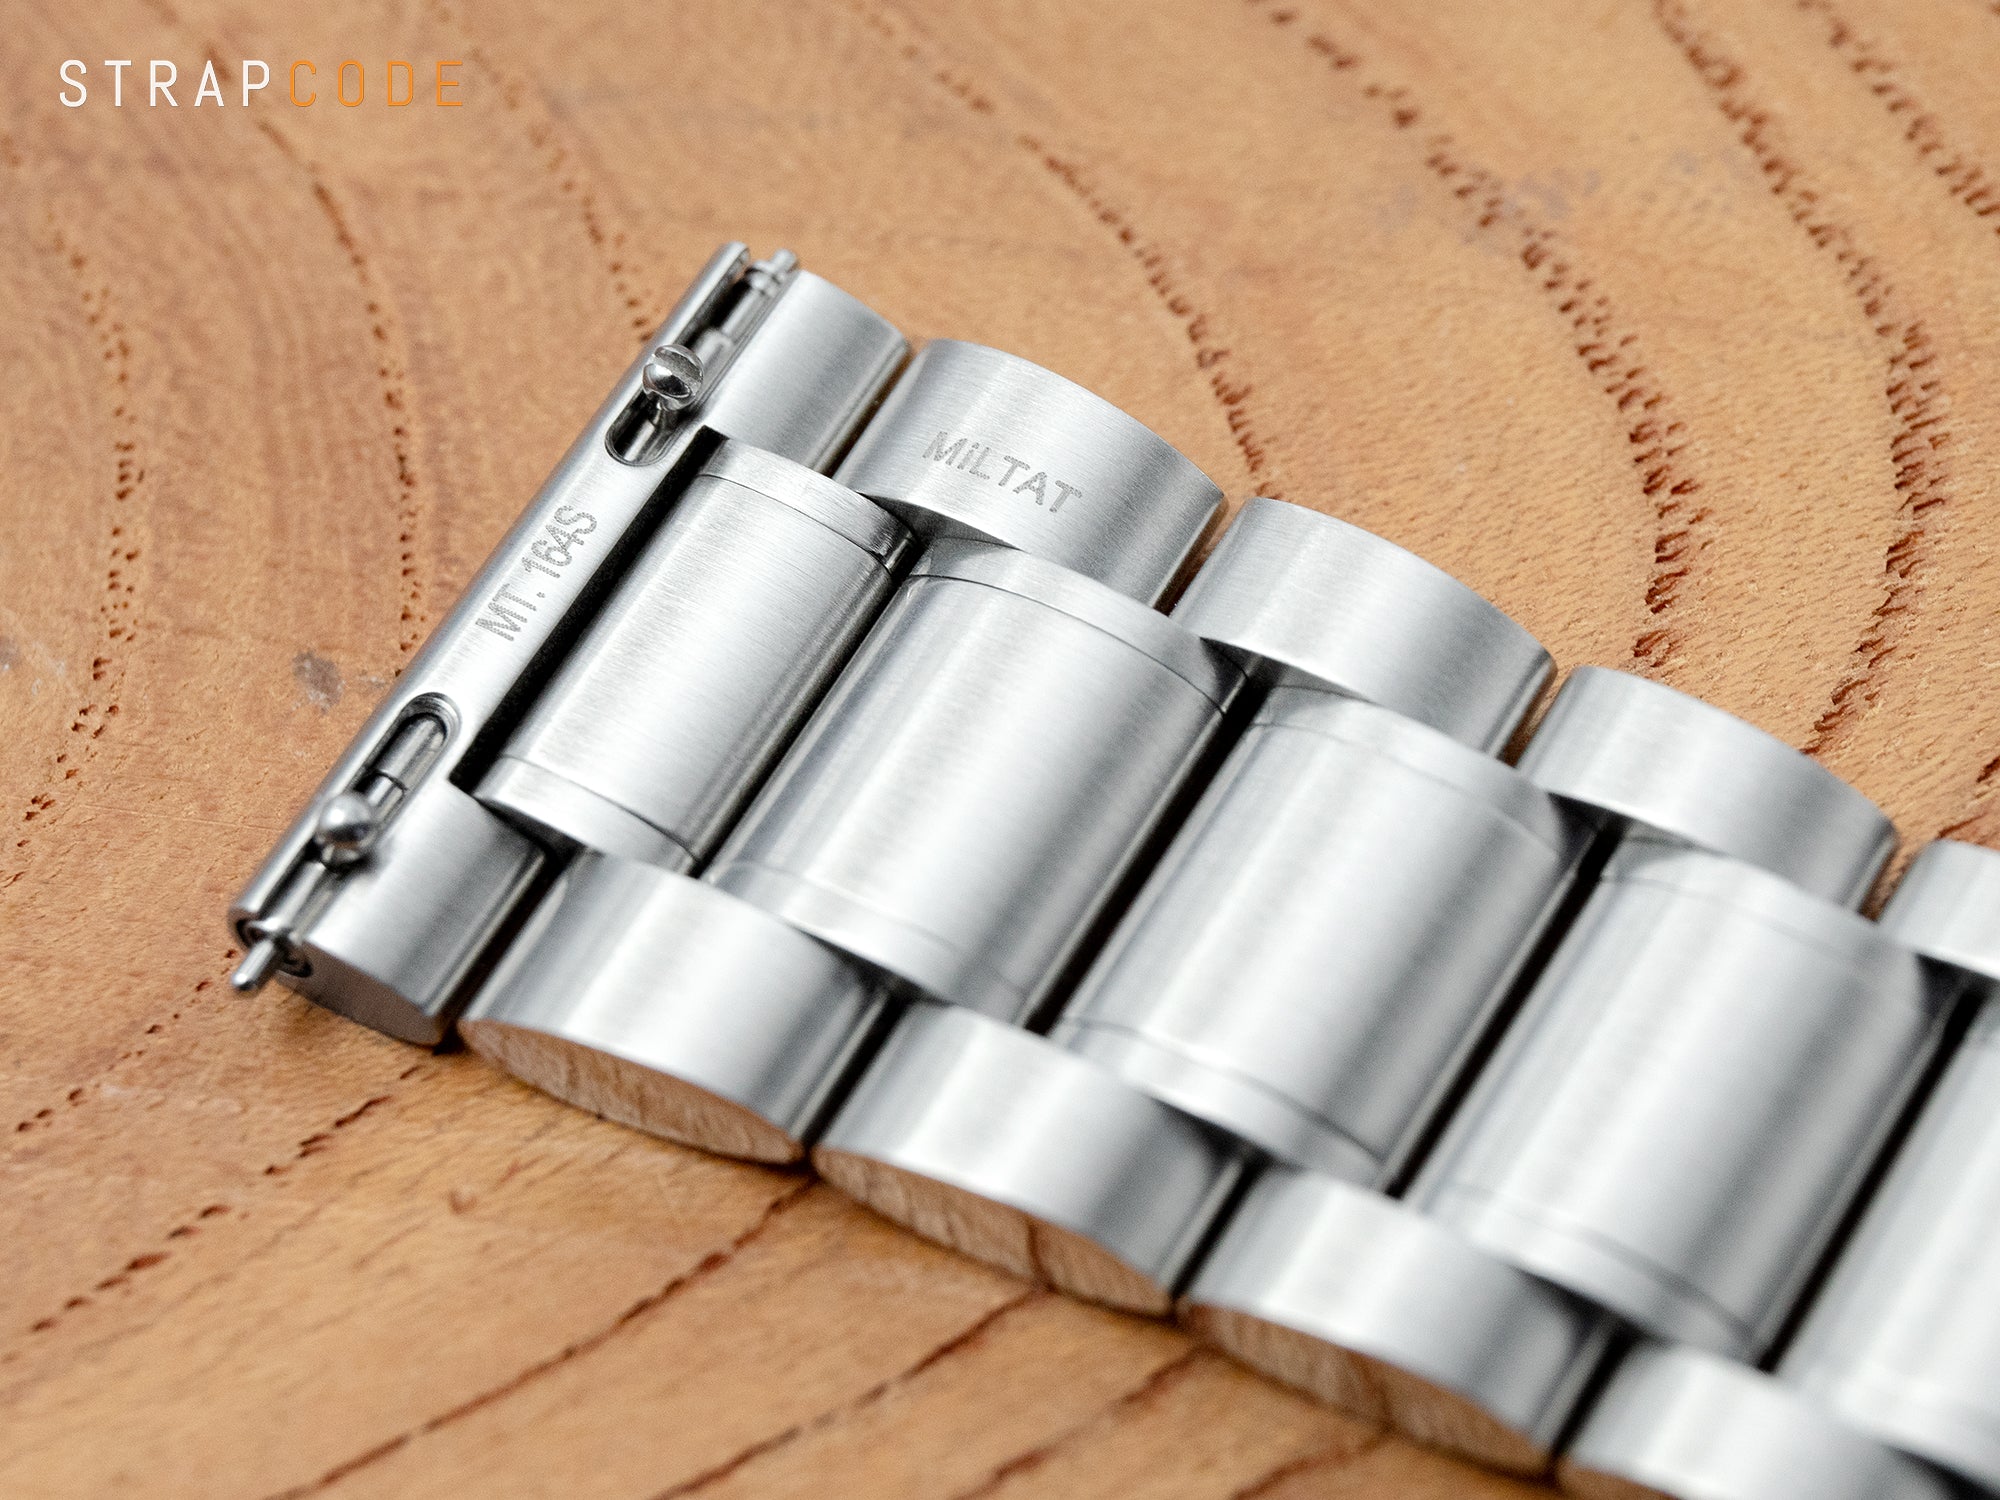 Innovative Entwine Pull-twist Quick-release stainless steel watch band by Strapcode